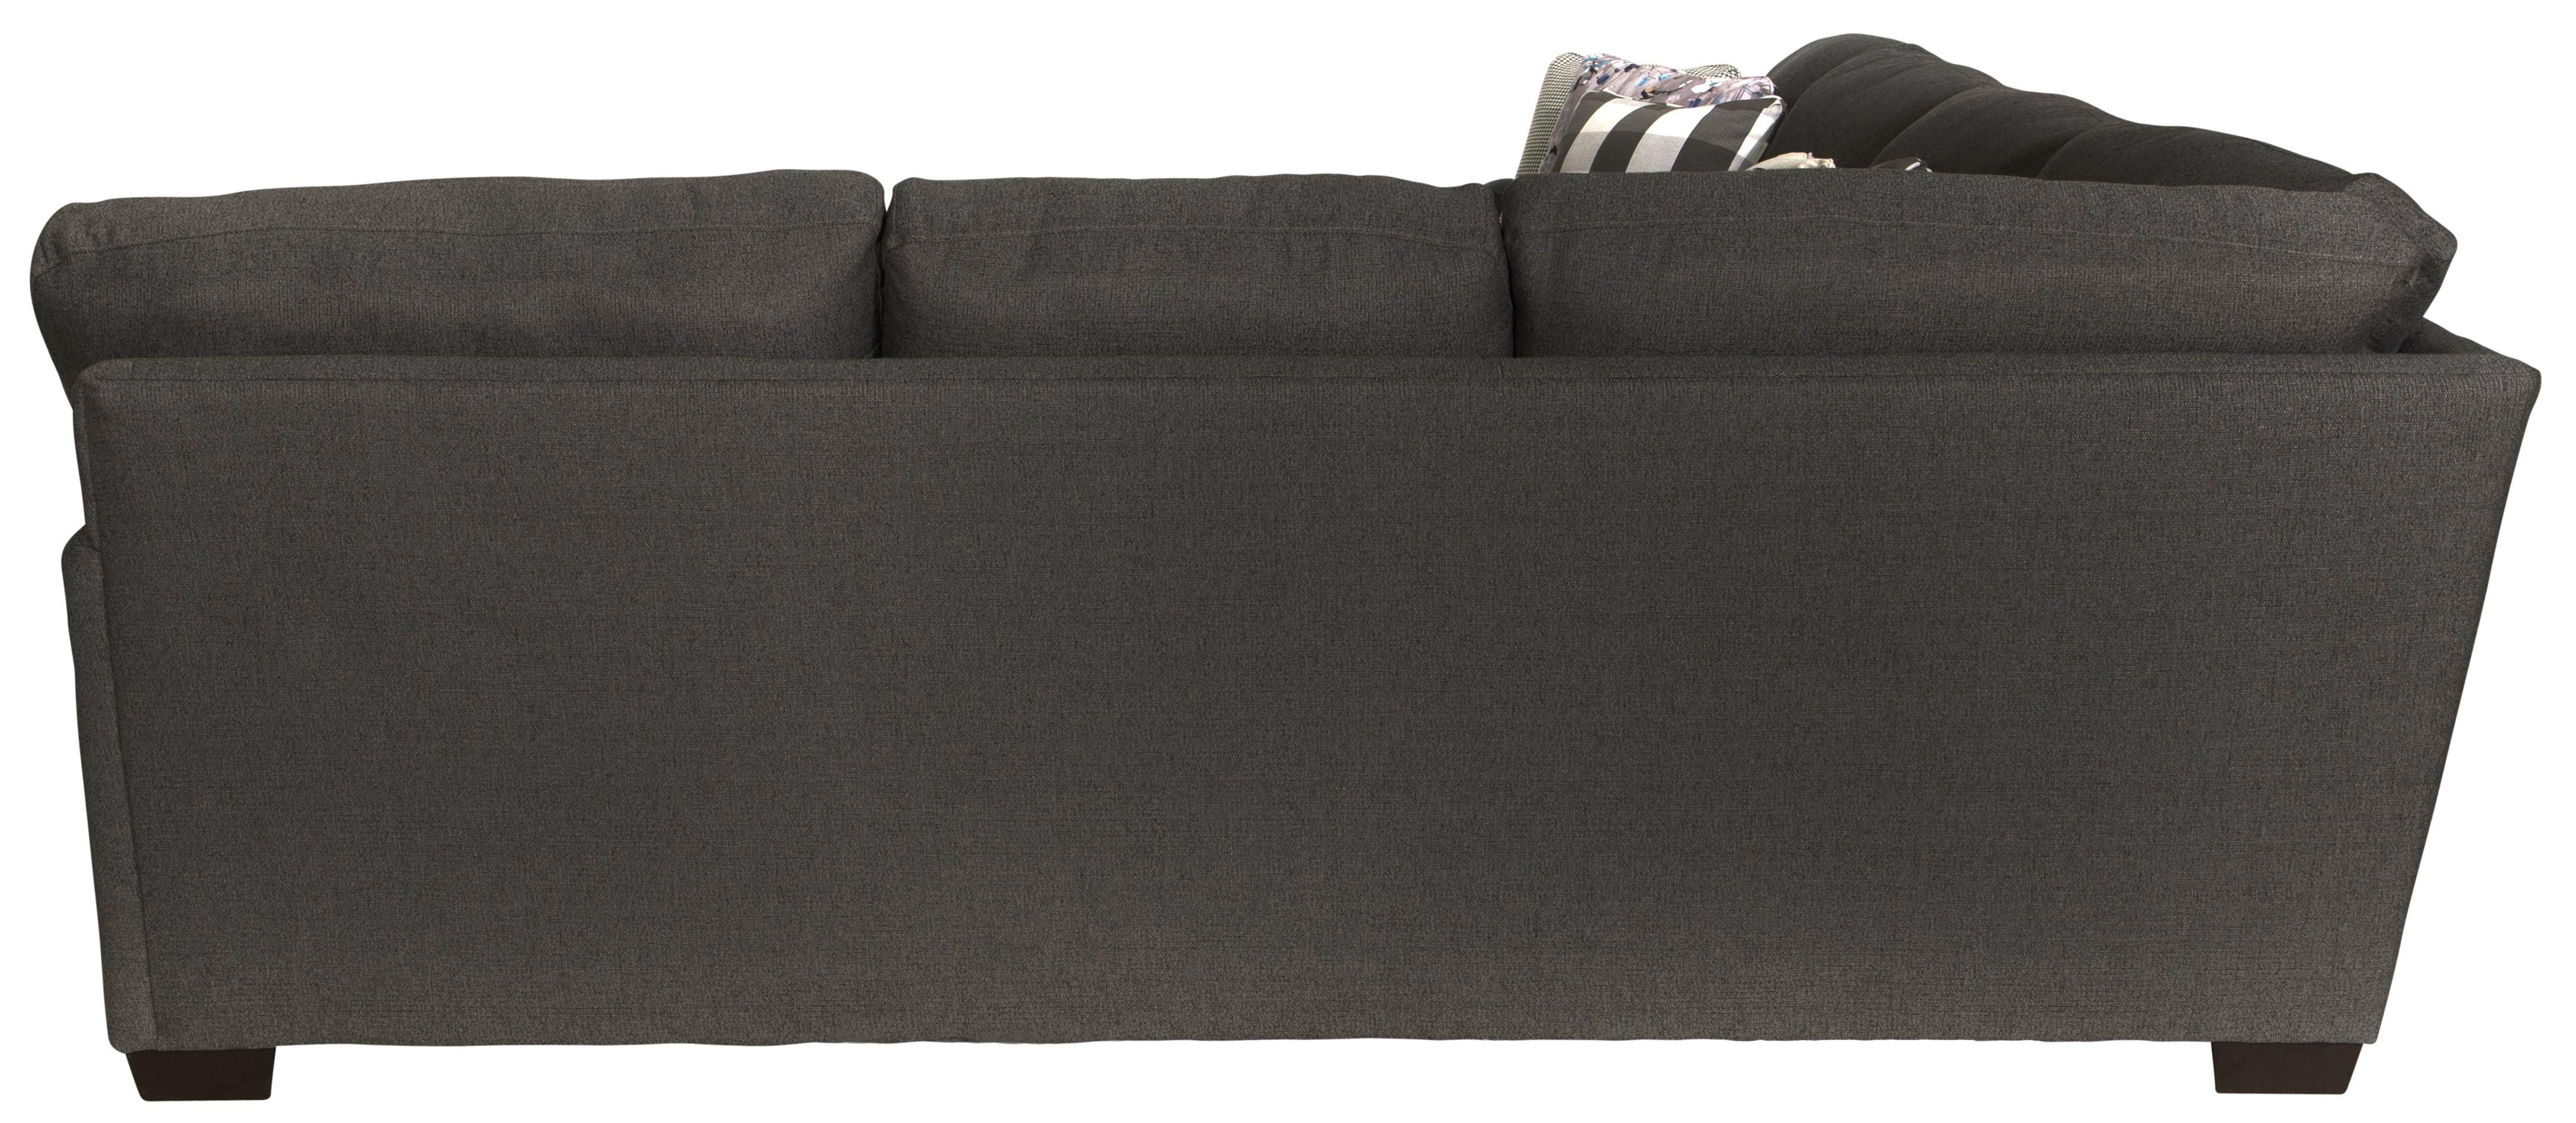 Jackson - Crawford - Sectional With Ottoman And Pillows - 5th Avenue Furniture